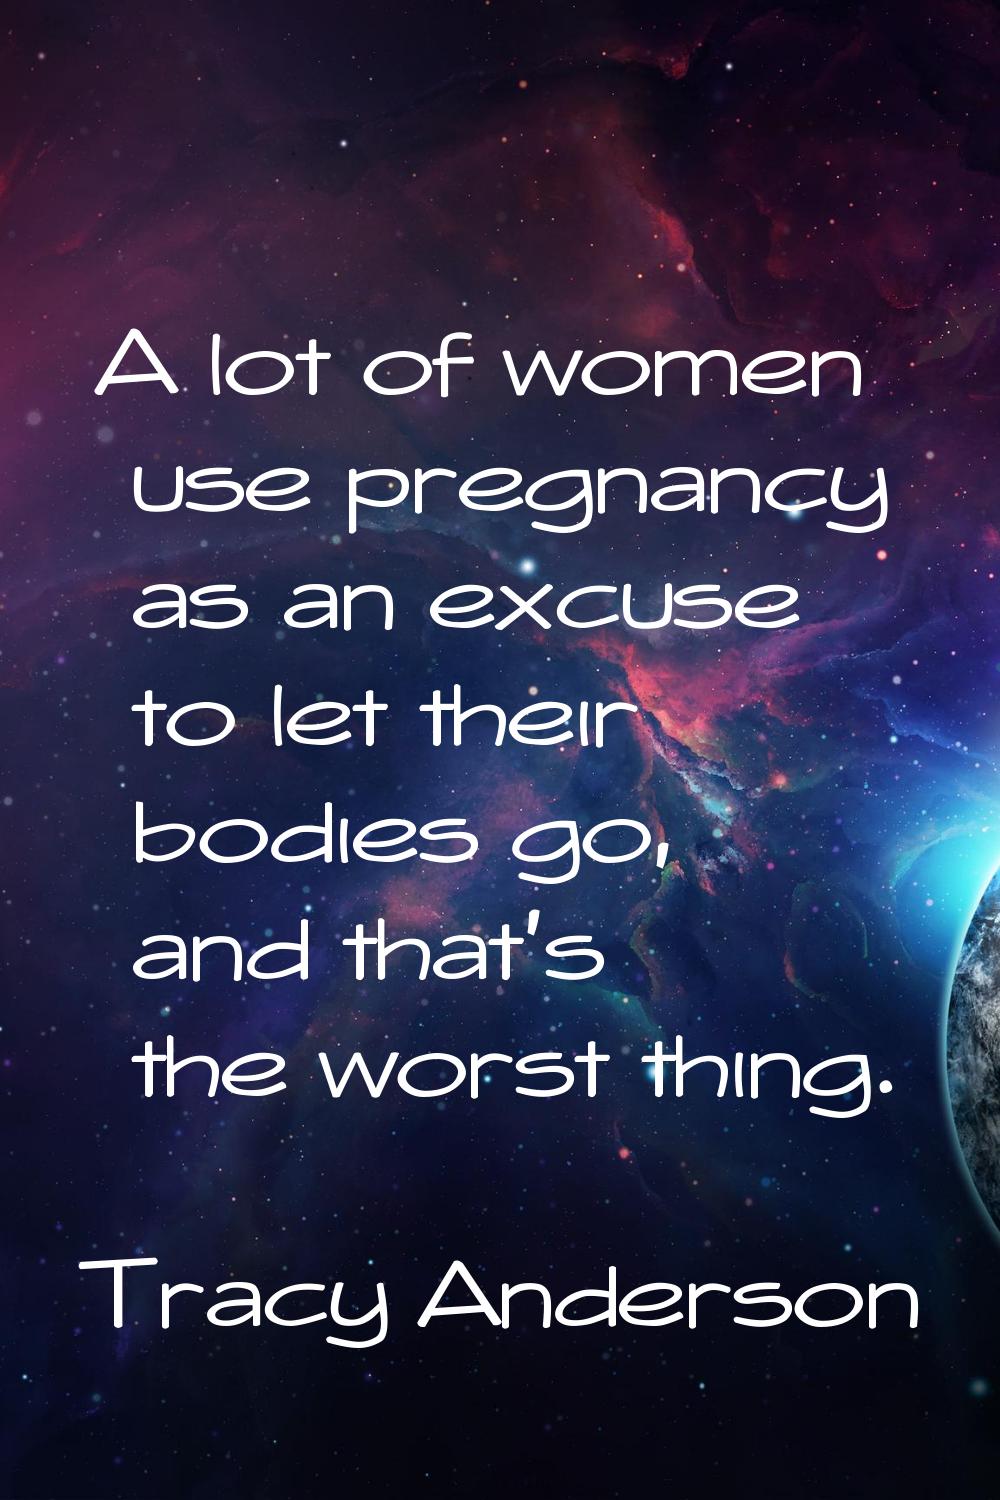 A lot of women use pregnancy as an excuse to let their bodies go, and that's the worst thing.